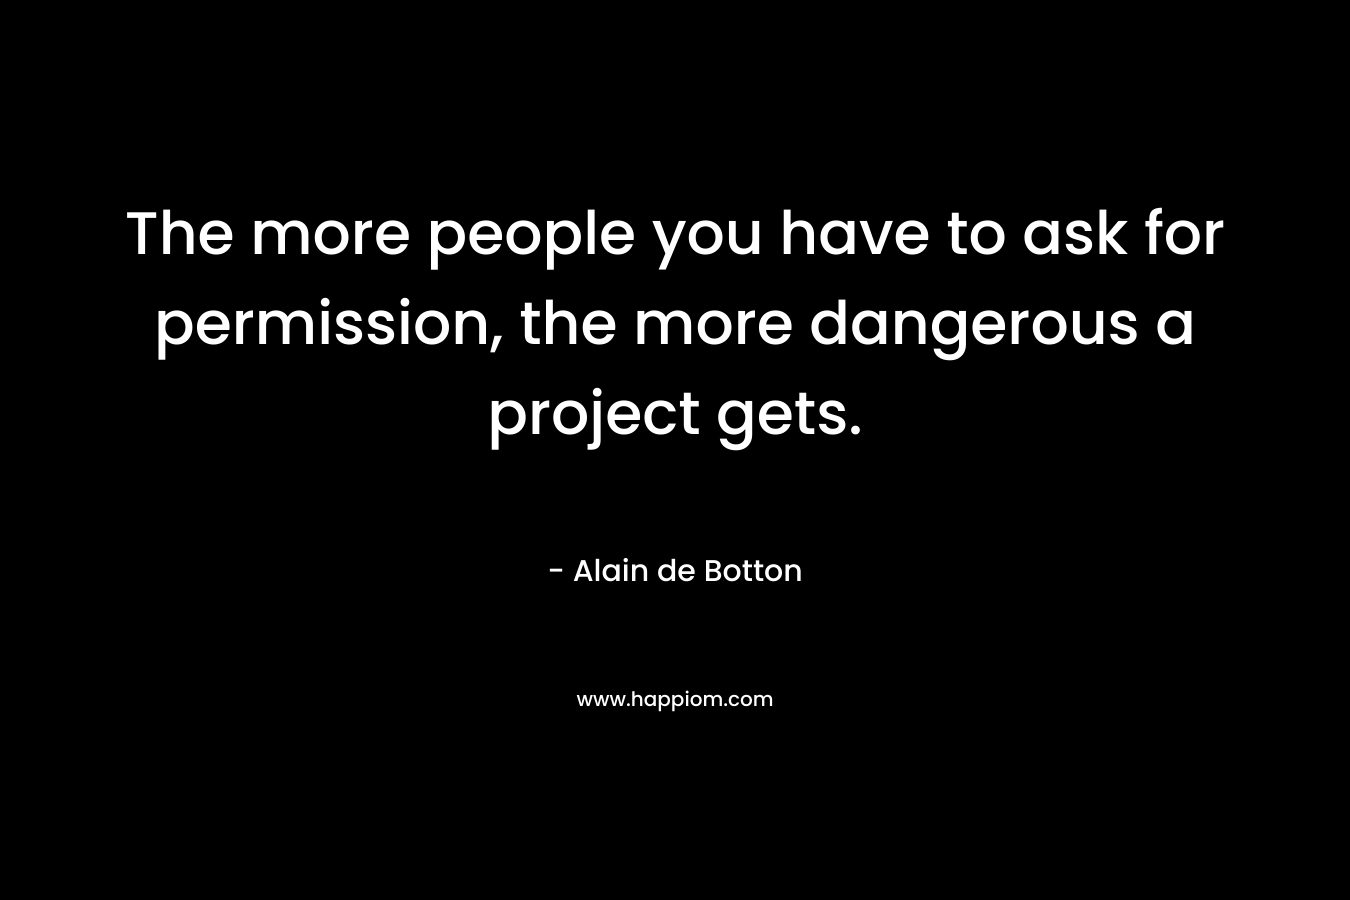 The more people you have to ask for permission, the more dangerous a project gets.